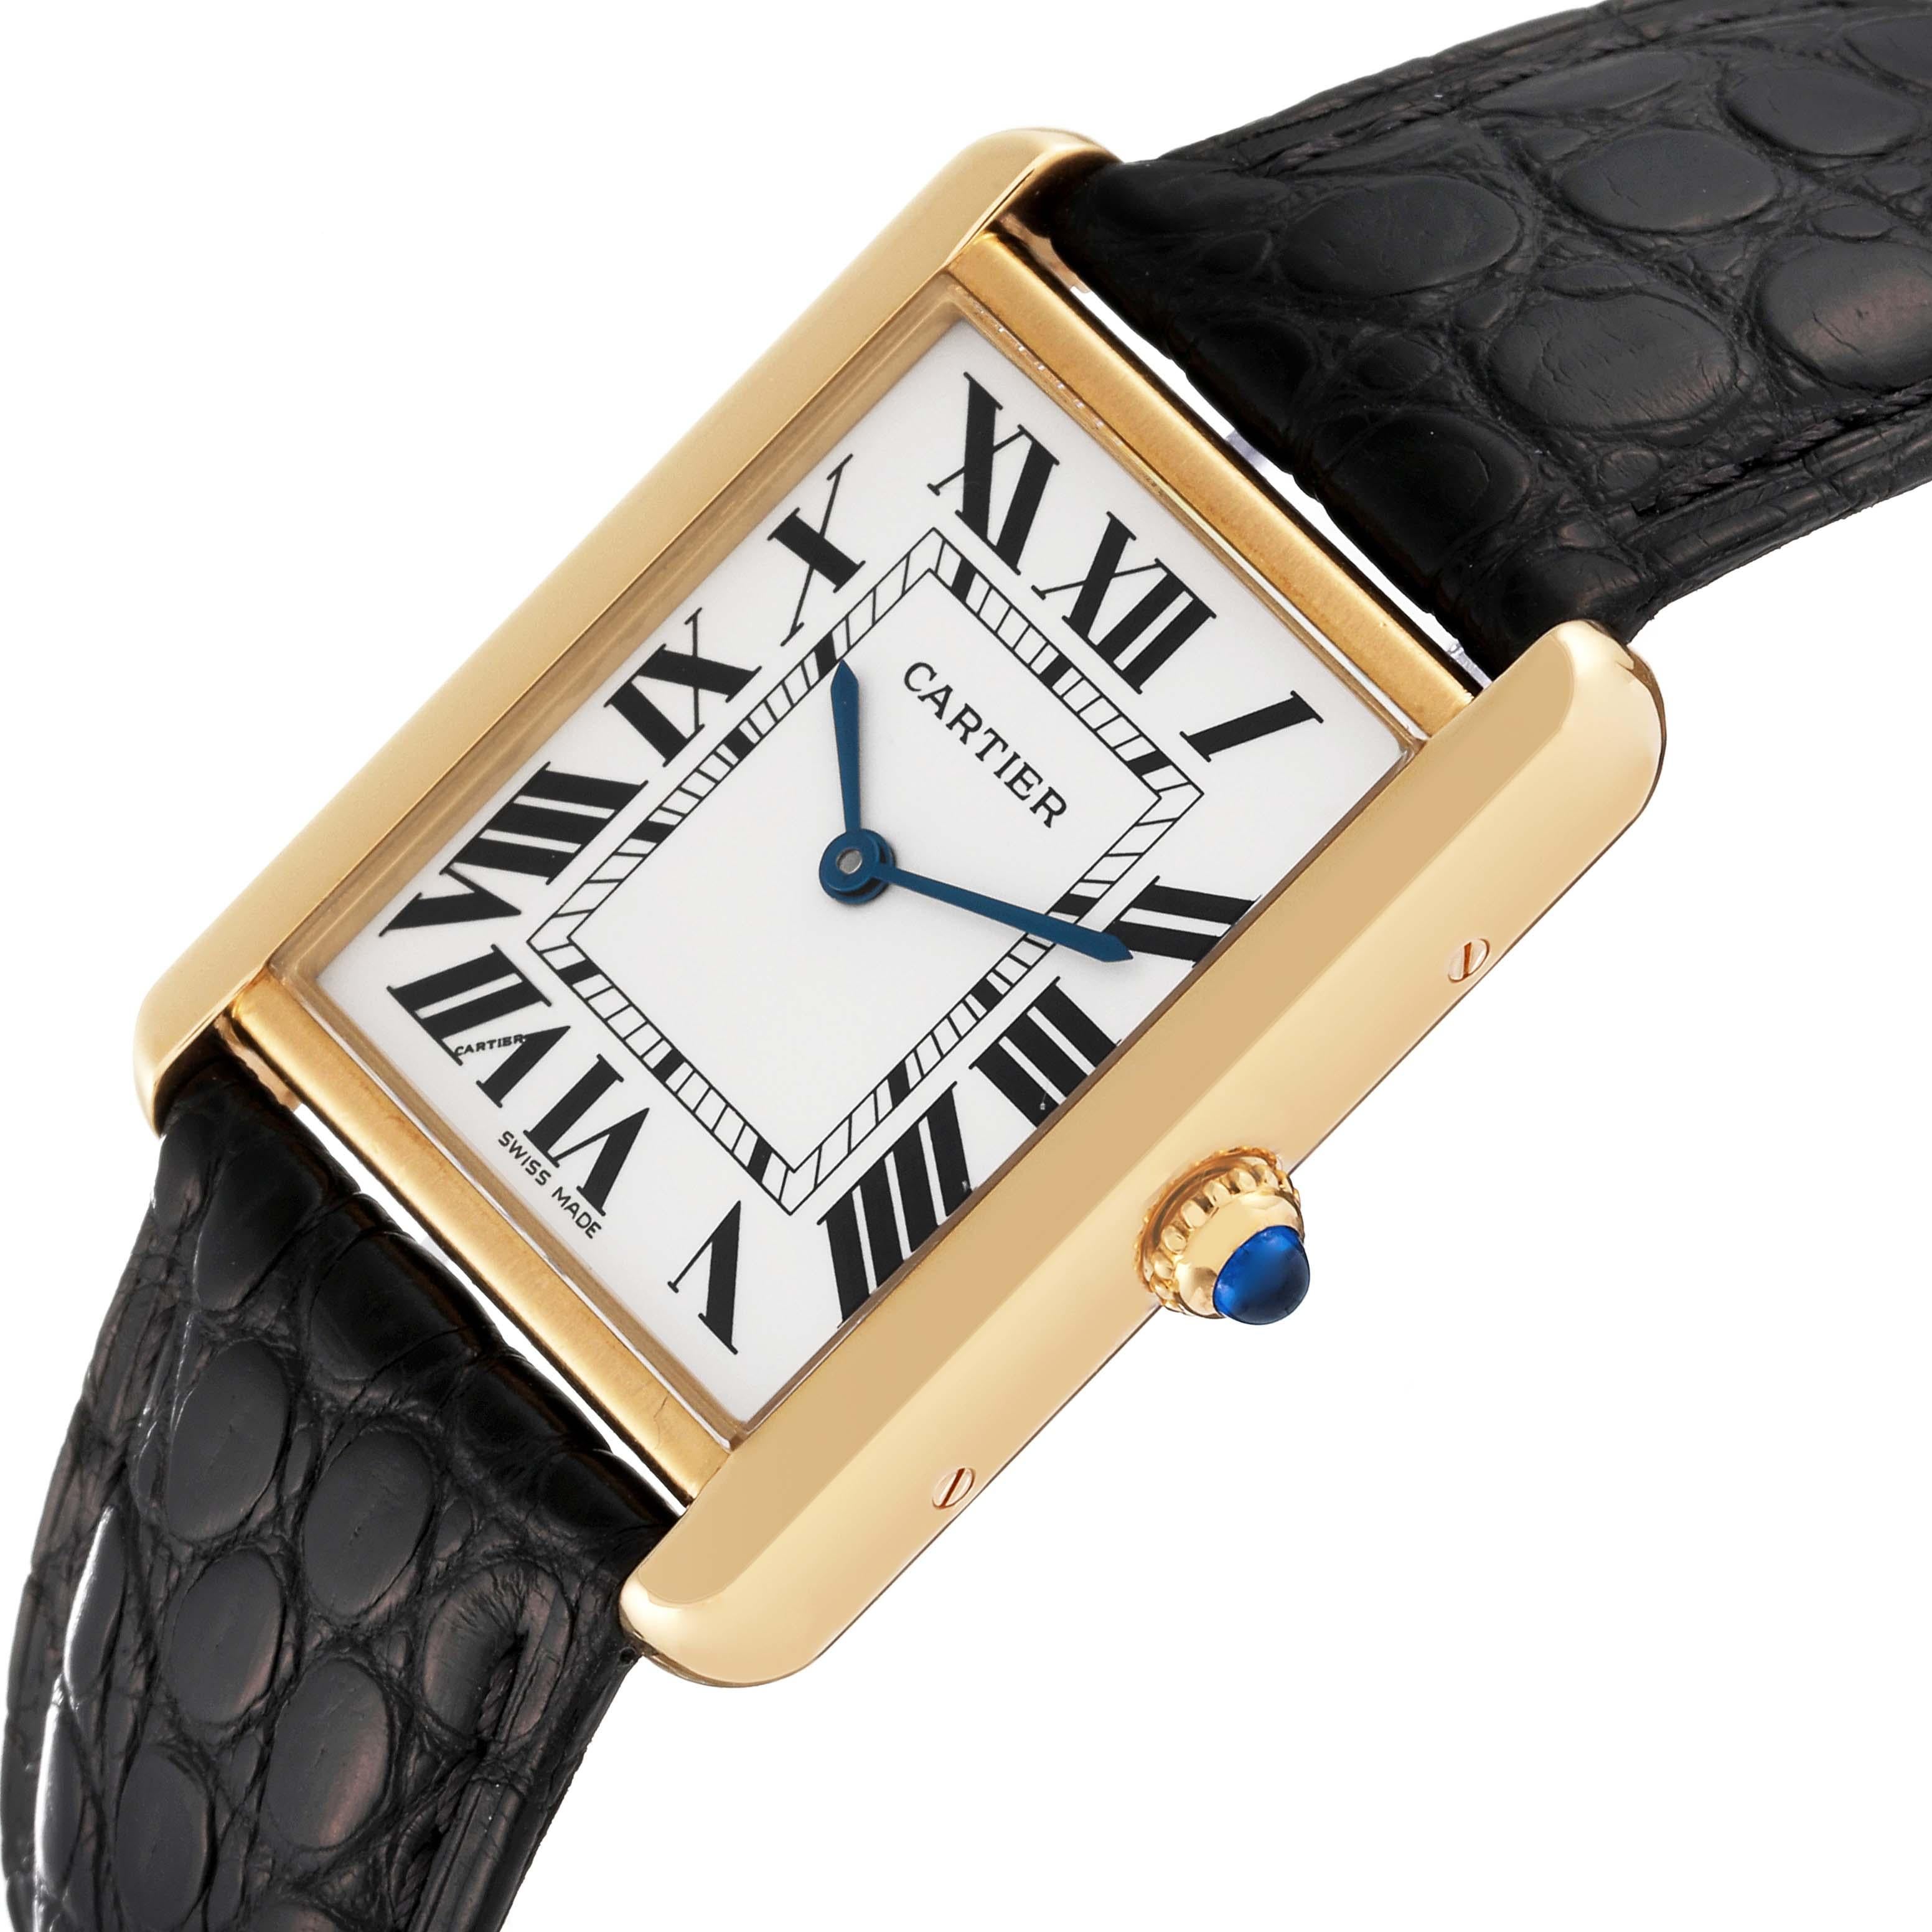 Cartier Tank Solo Yellow Gold Steel Black Strap Mens Watch W1018855 Card. Quartz movement. 18k yellow gold case 34.0 x 27.0 mm. Stainless steel caseback. Circular grained crown set with a blue spinel cabochon. . Scratch resistant sapphire crystal.